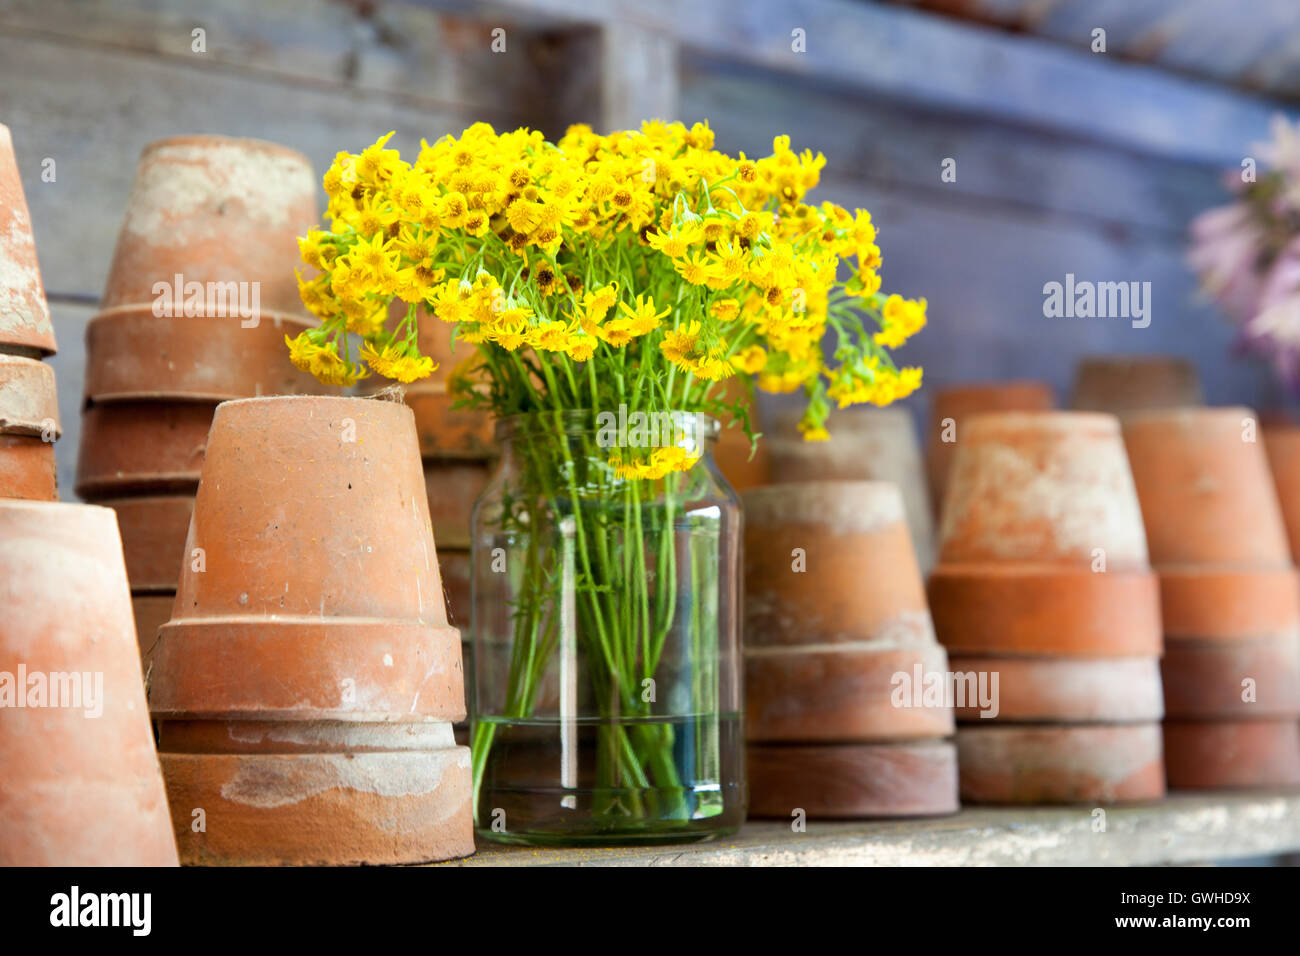 Yellow flowers with terroctta pots on a wooden shelf Stock Photo